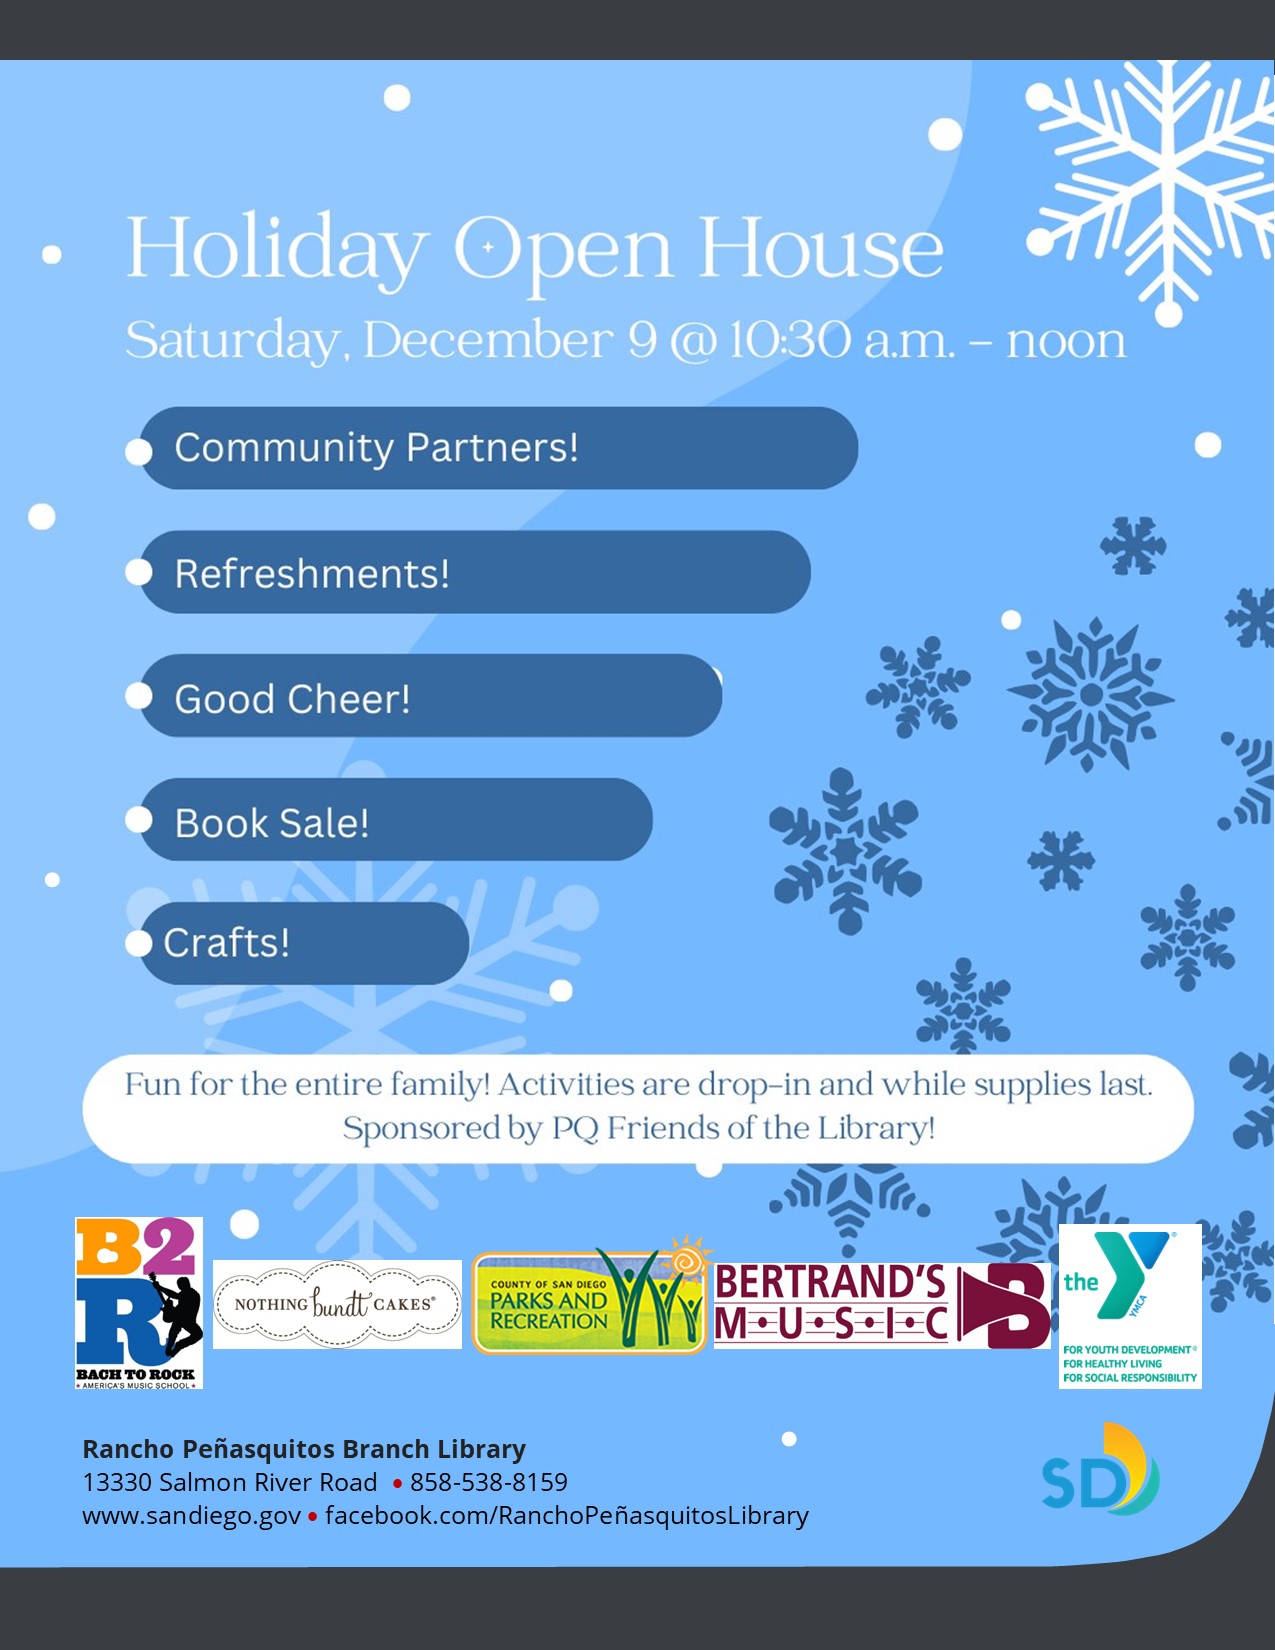 flyer listing events at holiday open house and partner logos